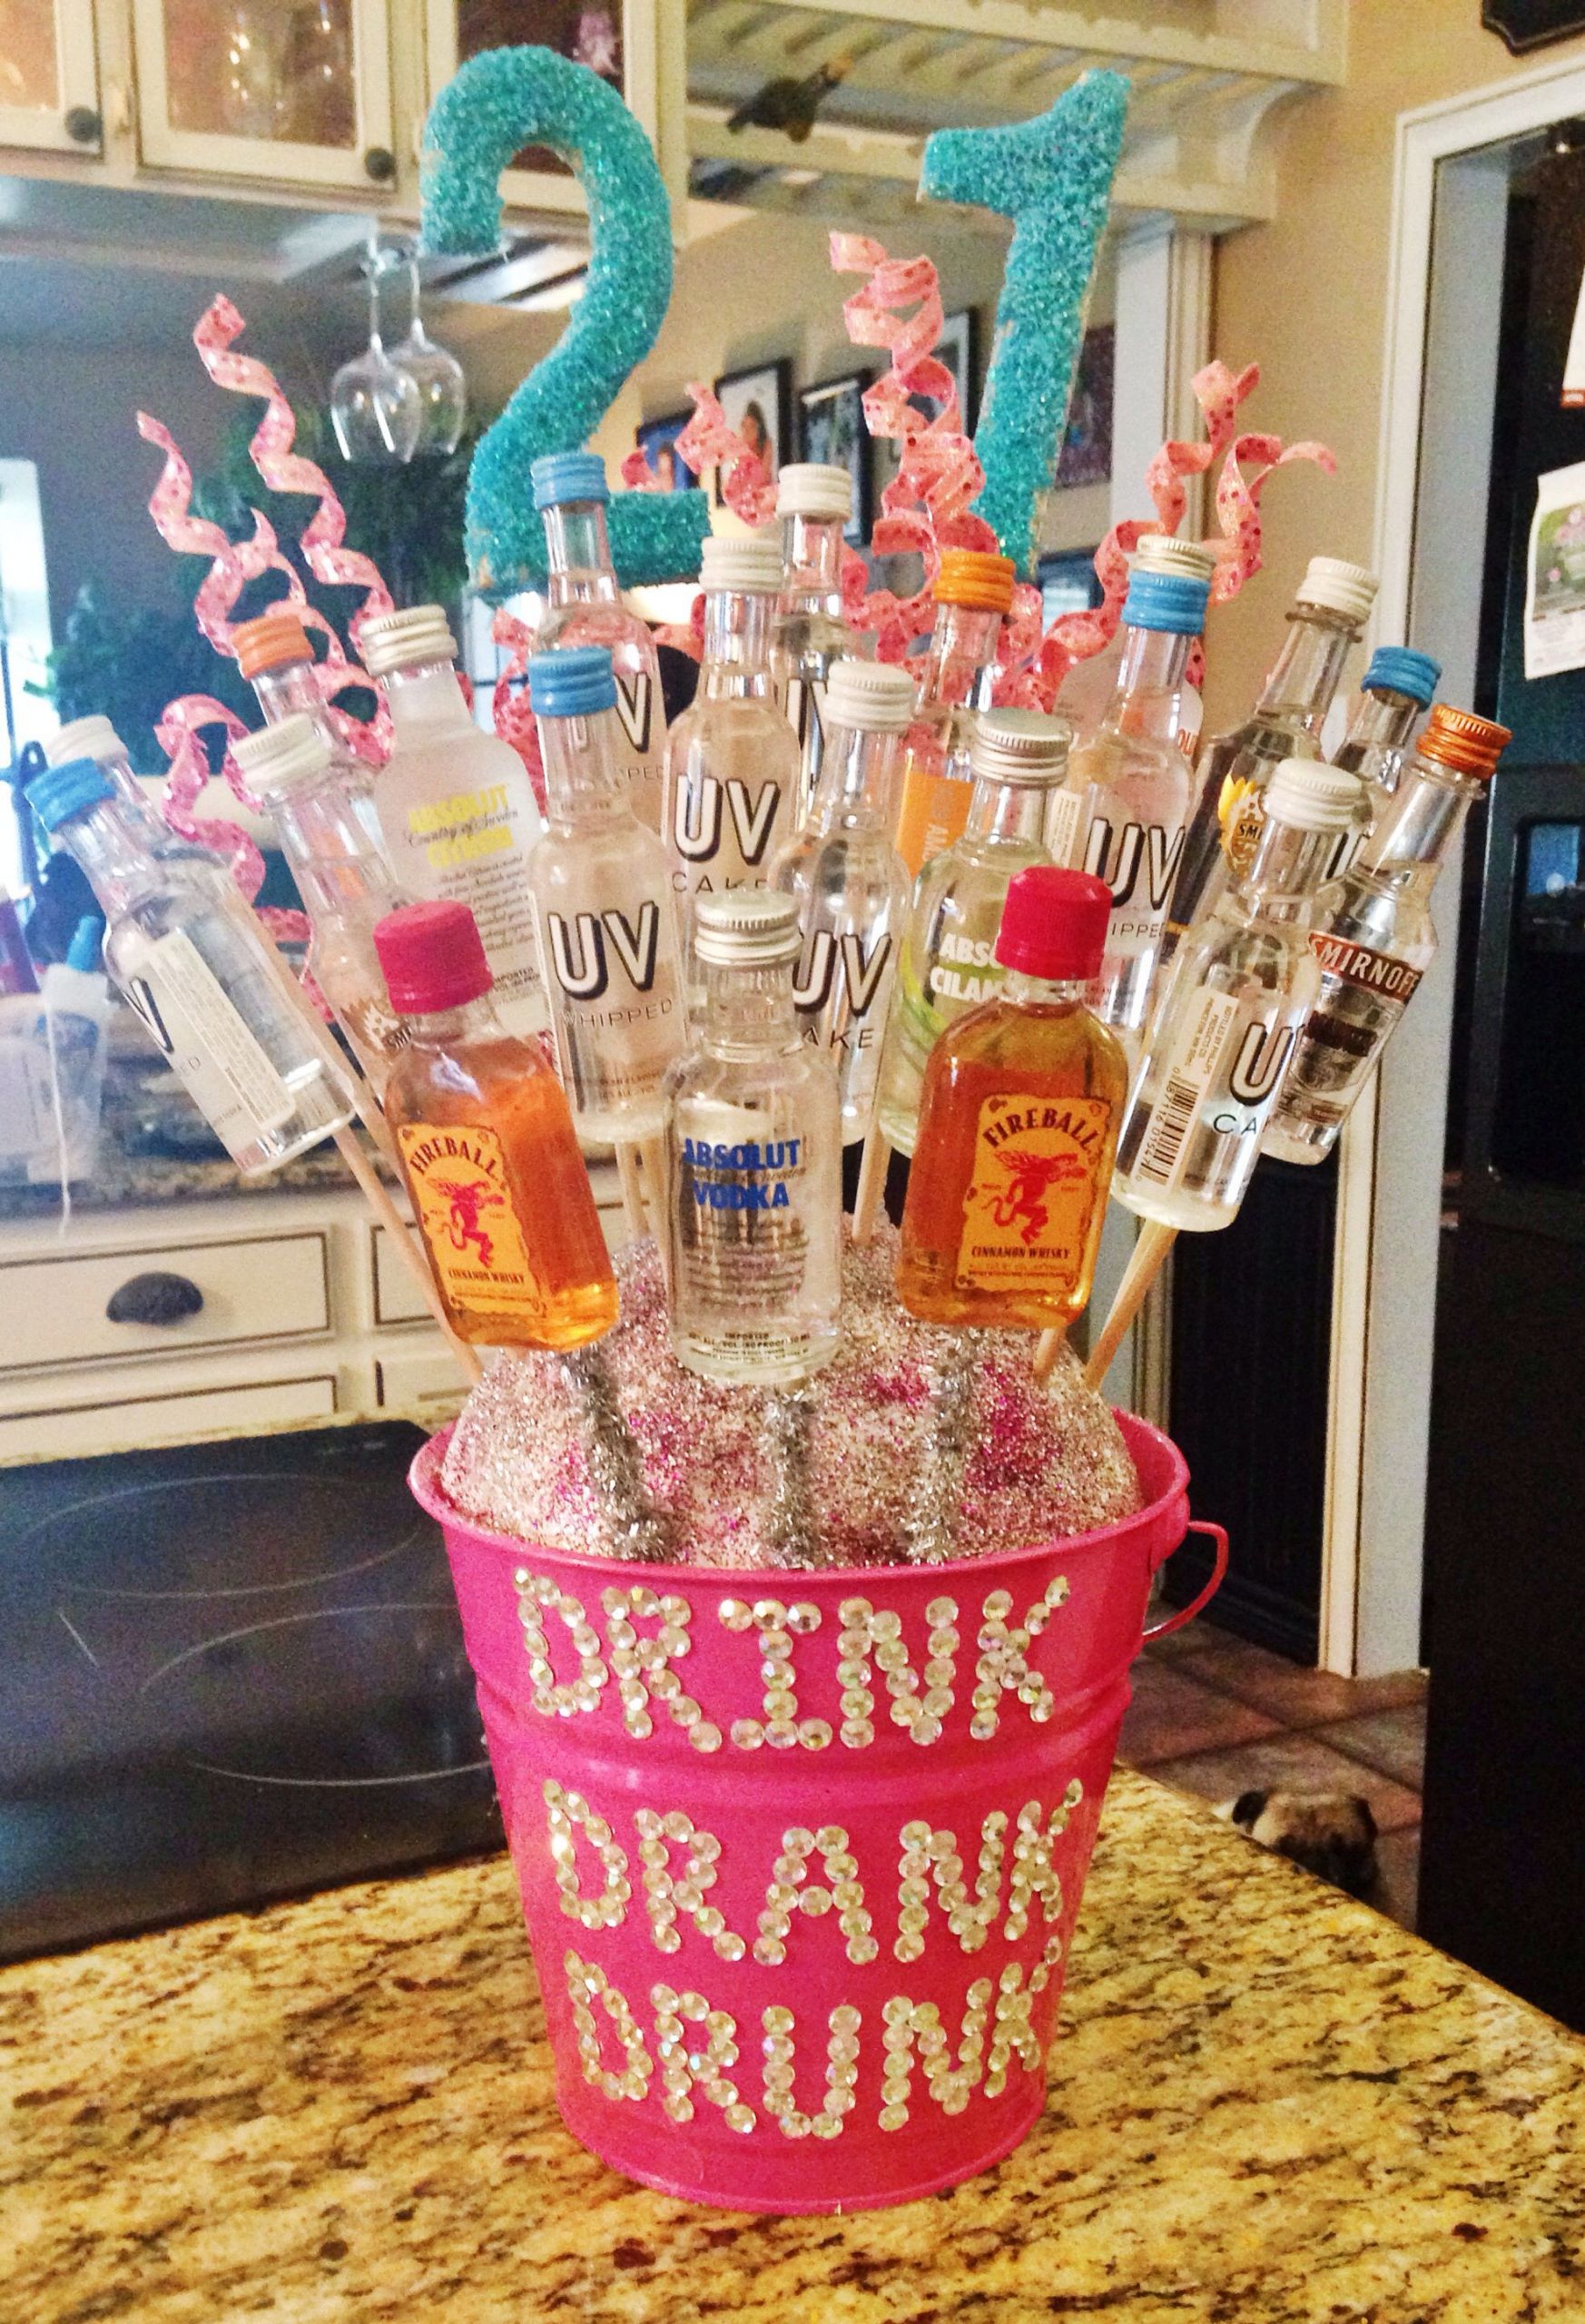 21-ideas-for-17th-birthday-party-ideas-with-alcohol-home-family